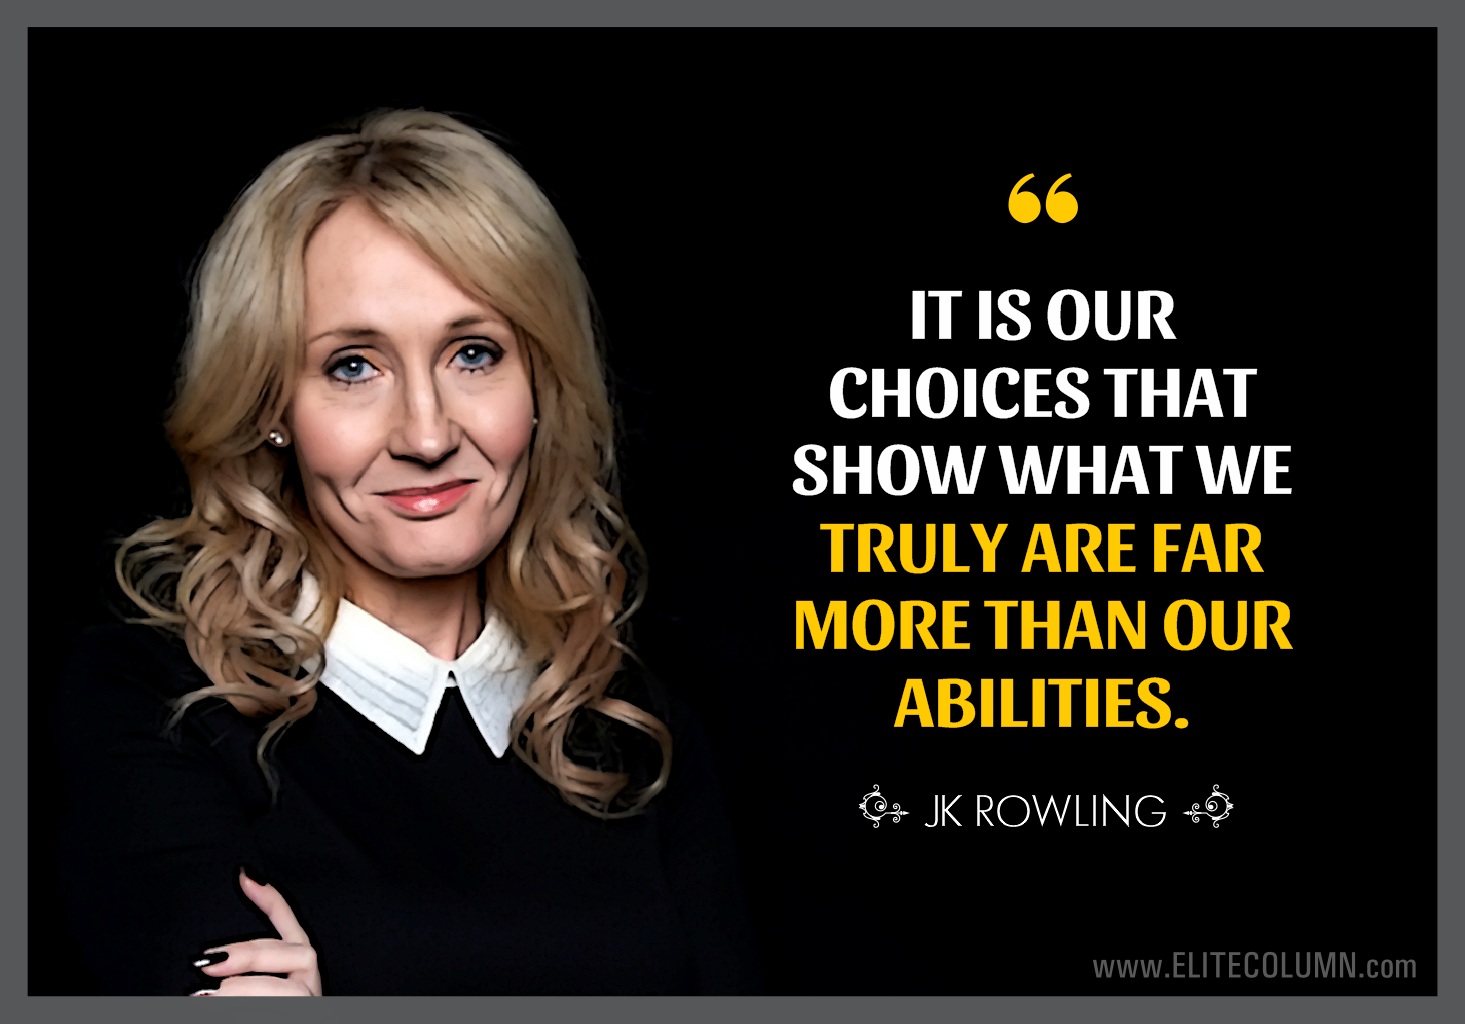 JK Rowling Quotes (1)